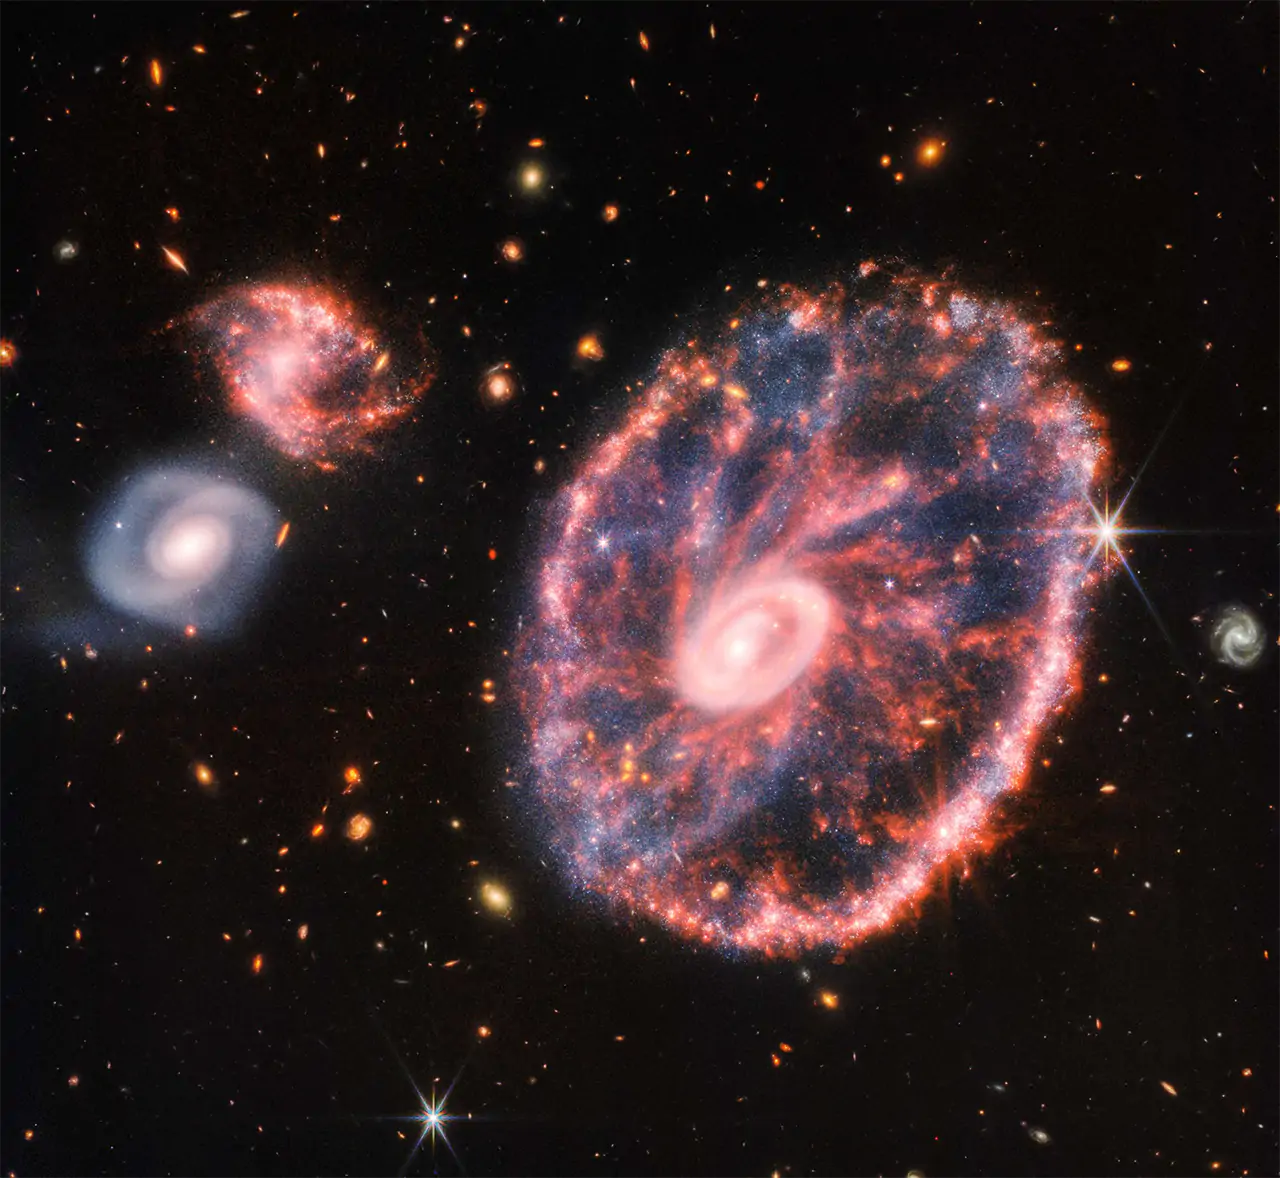 An image of the distant Cartwheel Galaxy, located about 500 million light-years away in the Sculptor constellation